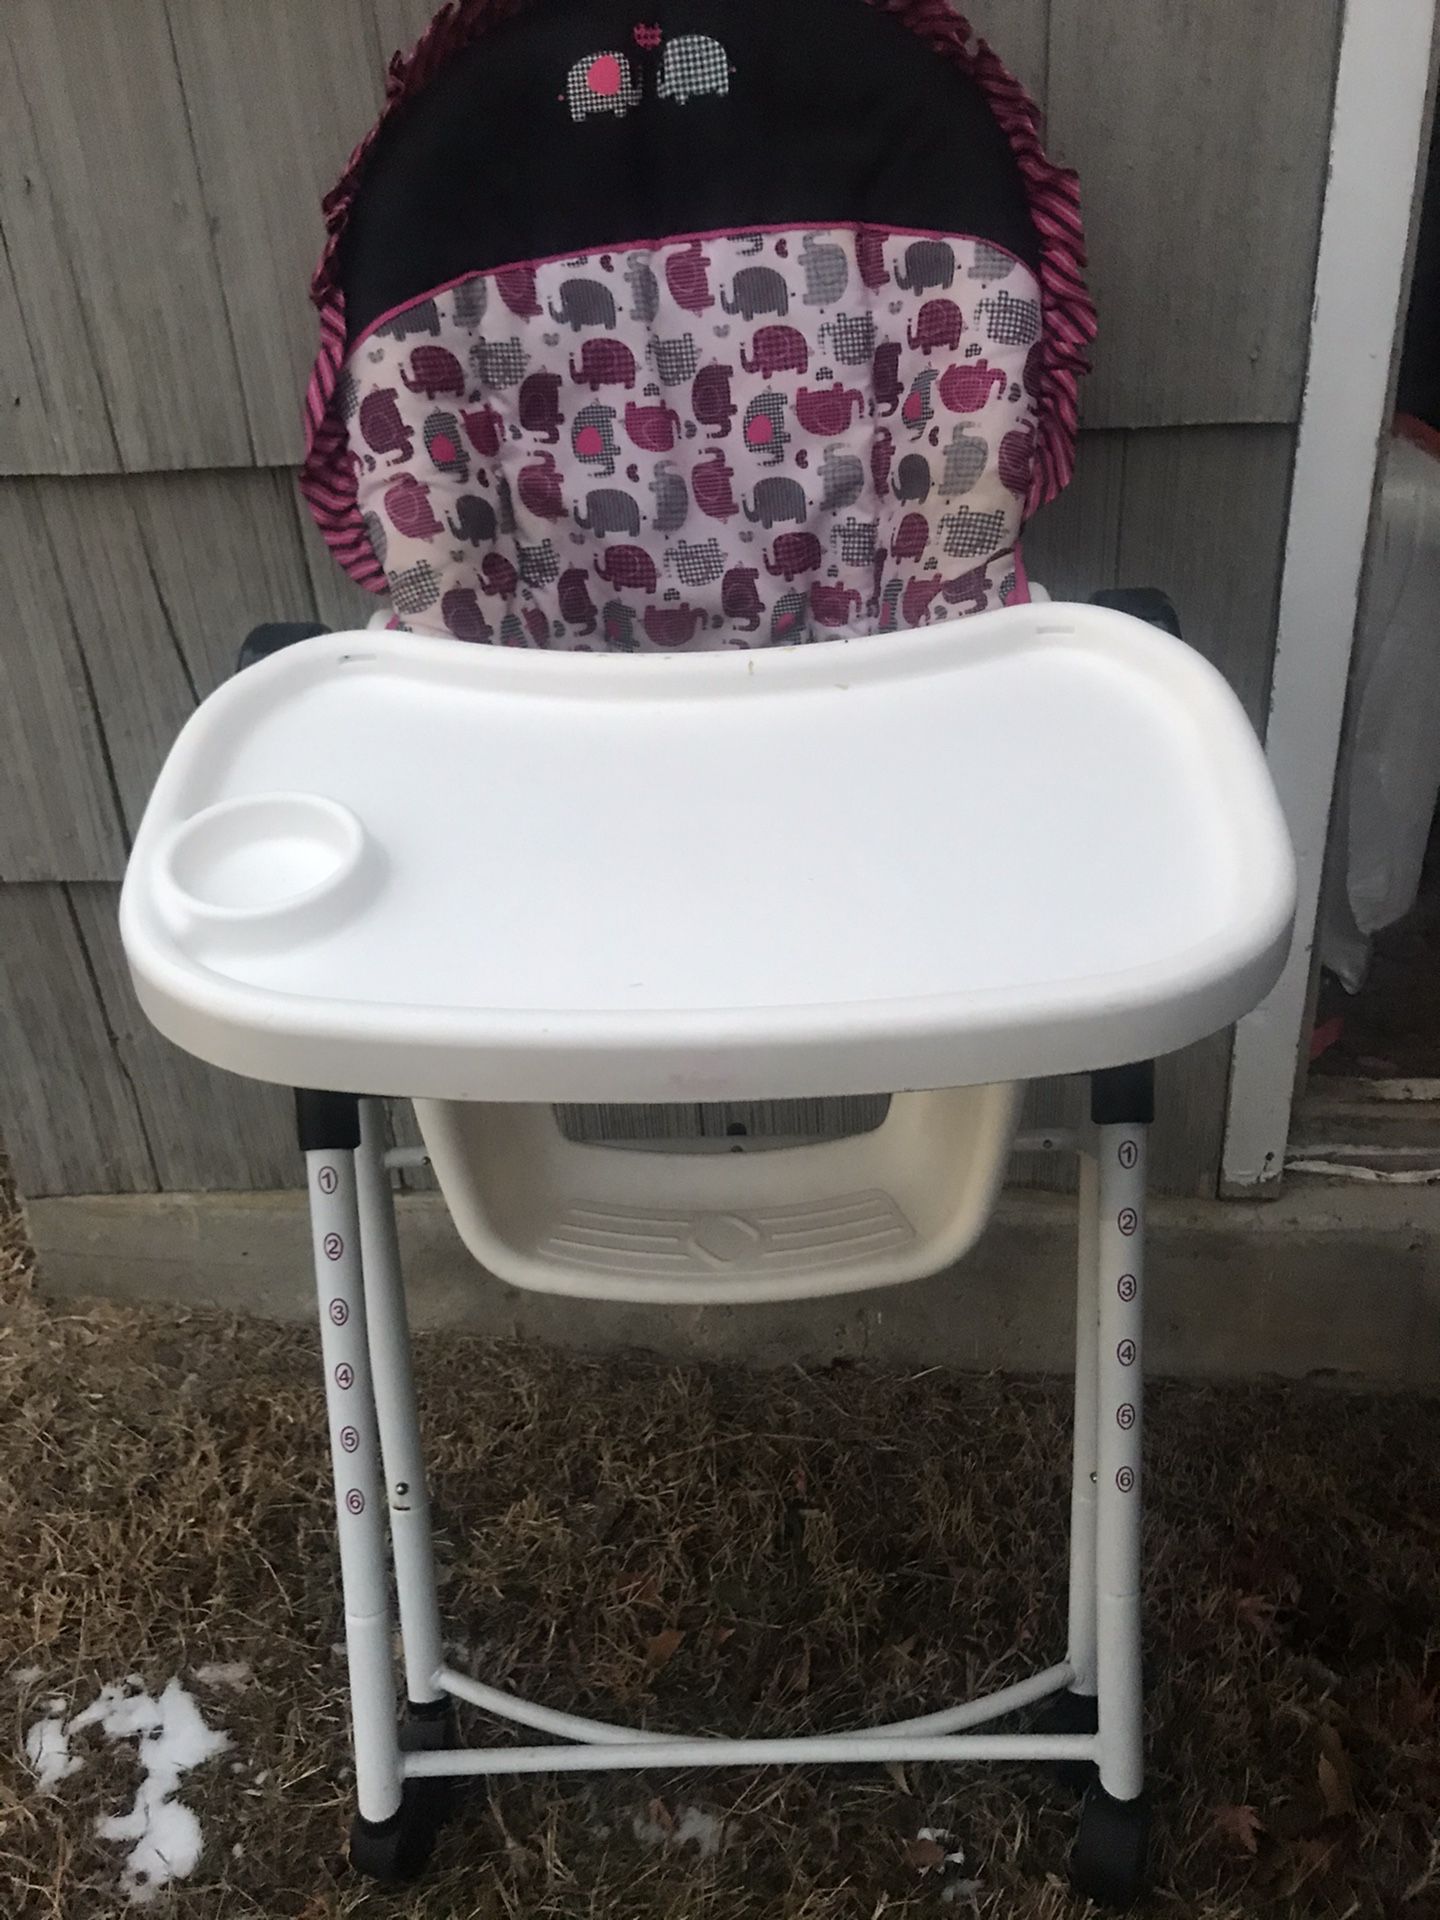 High chair, play pin, car seat and stroller